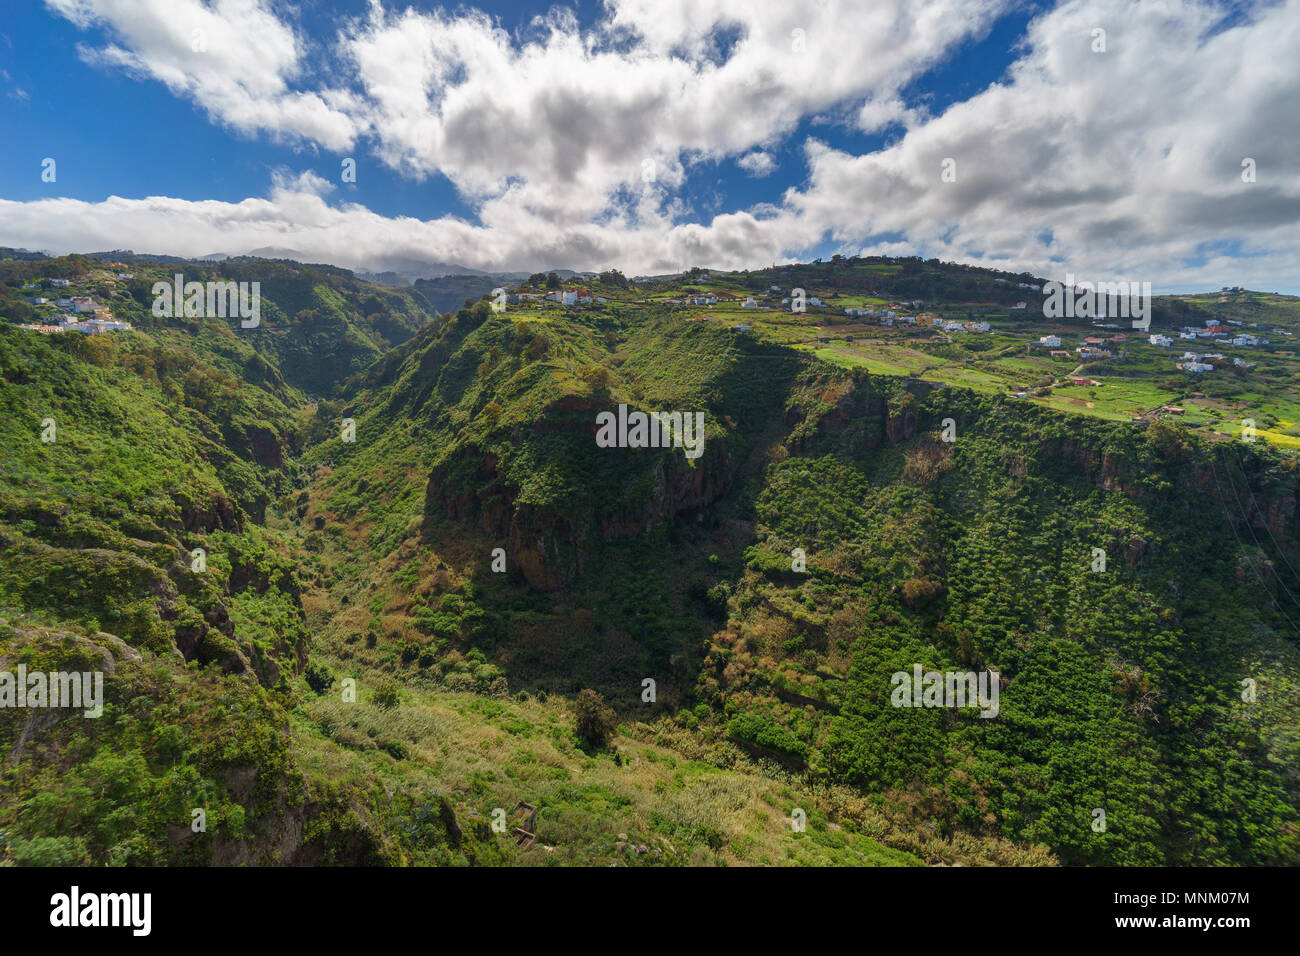 Scenic village on slopes of beatiful valley, Gran Canaria, Canary islands, Spain Stock Photo